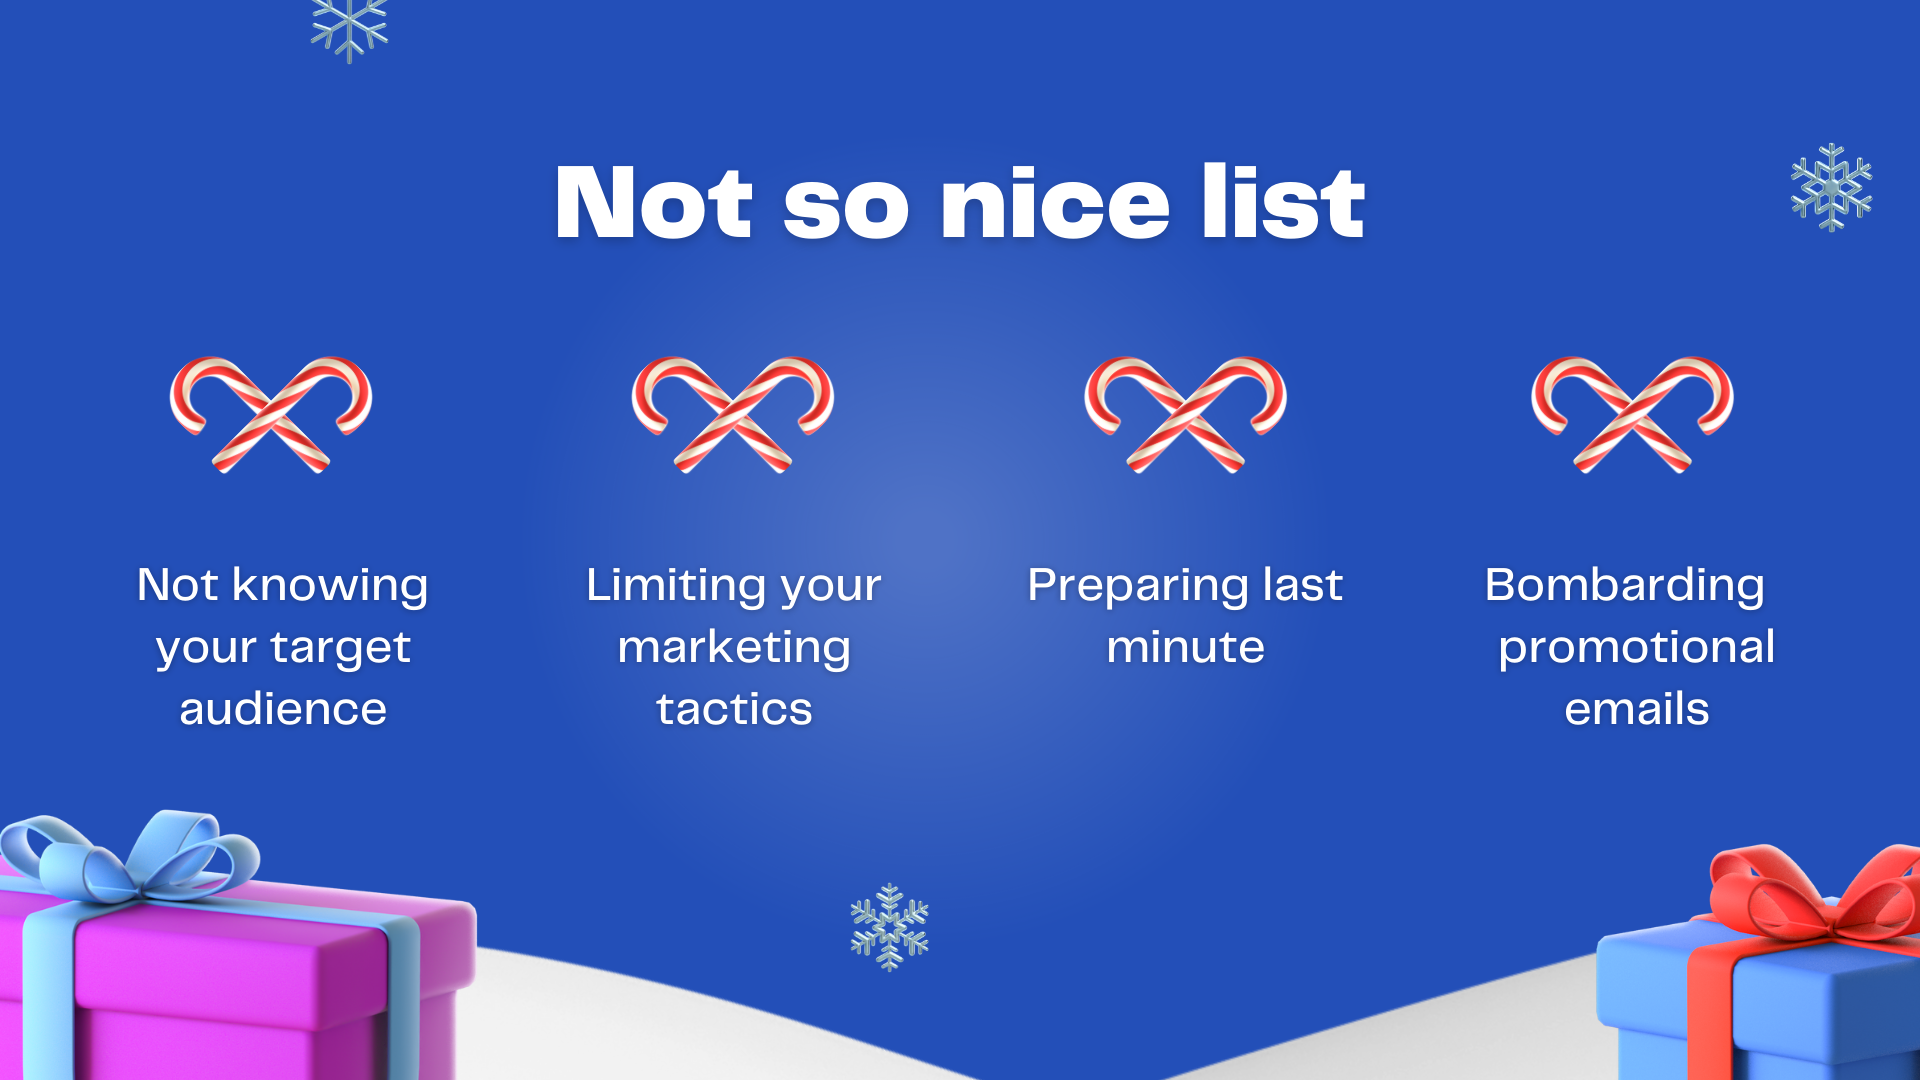 donts of holiday marketing